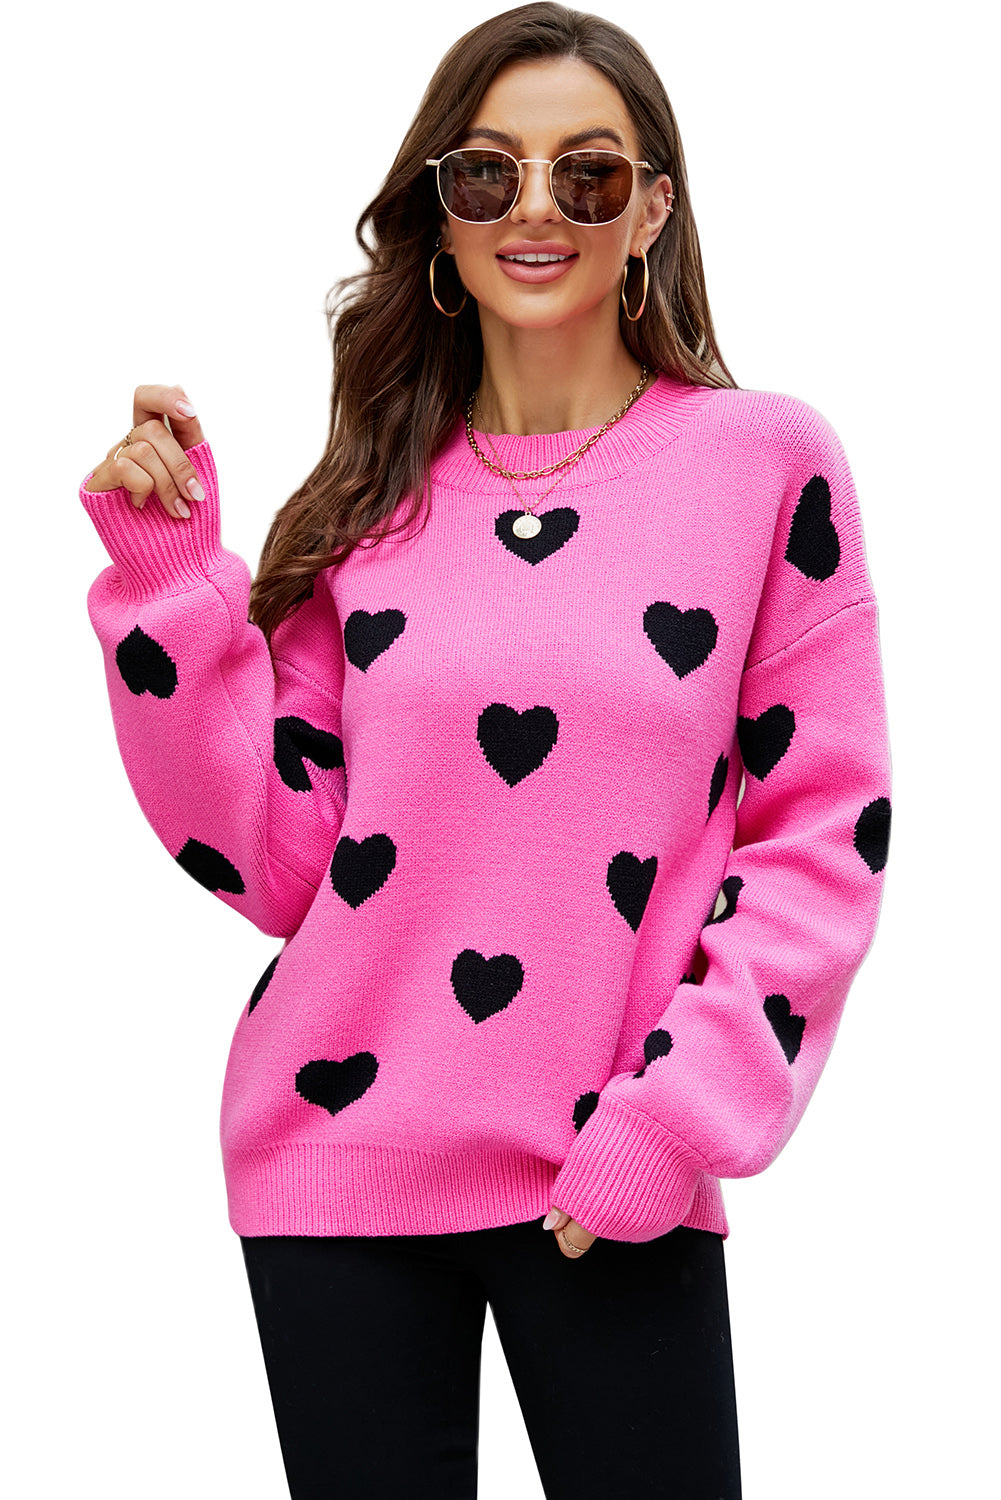 LC2722793-6-S, LC2722793-6-M, LC2722793-6-L, LC2722793-6-XL, Rose Womens Heart Print Pullover Sweaters Valentine Tops